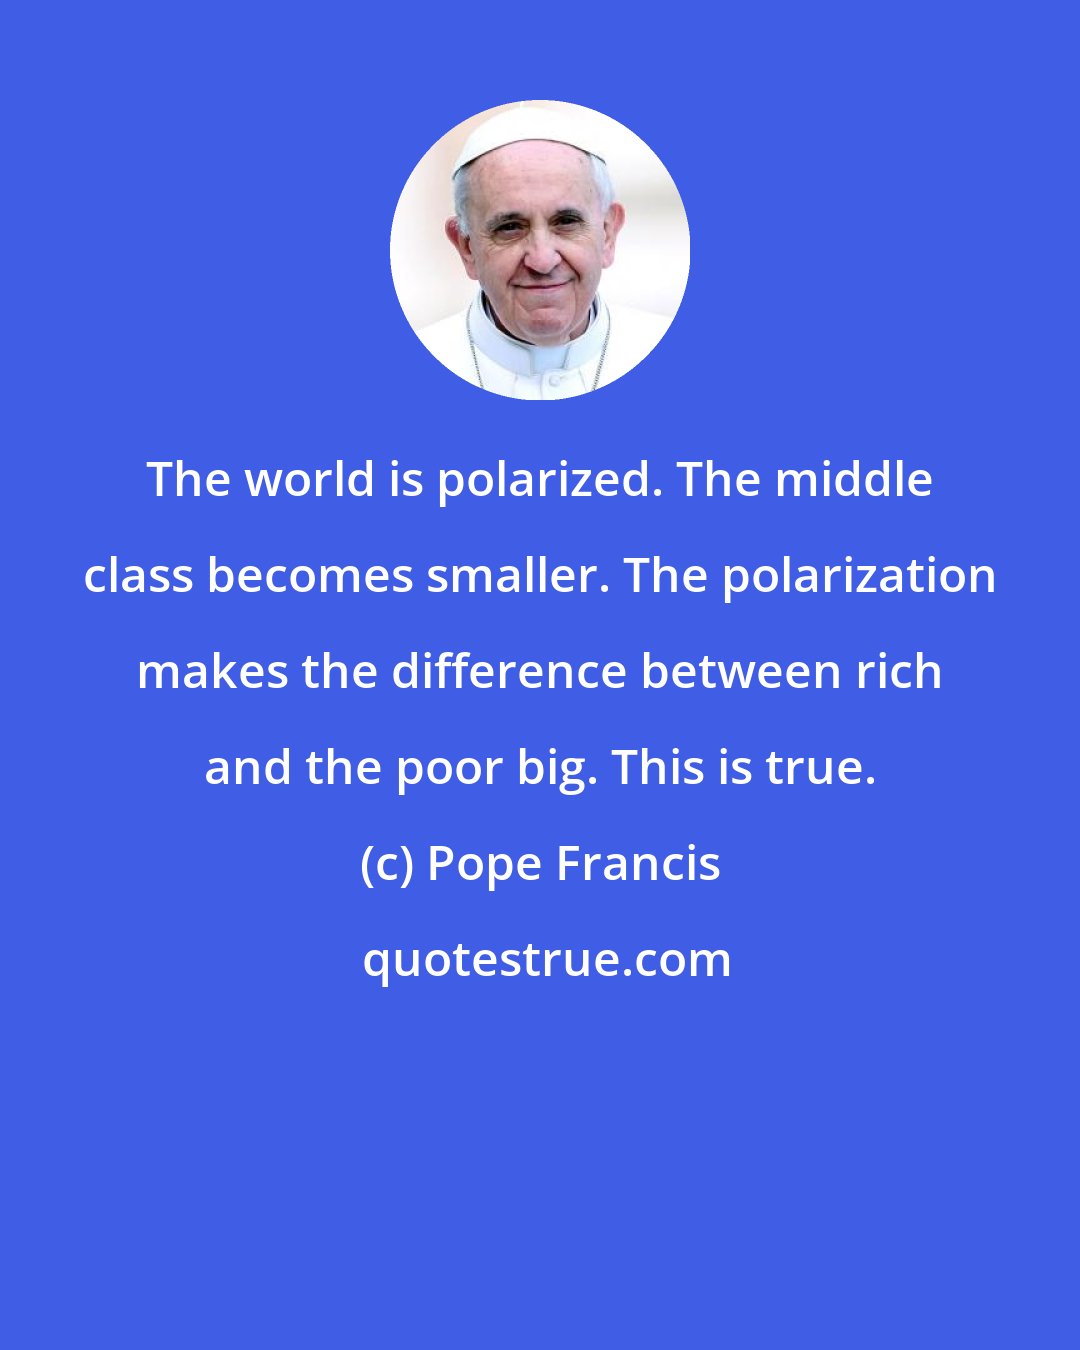 Pope Francis: The world is polarized. The middle class becomes smaller. The polarization makes the difference between rich and the poor big. This is true.